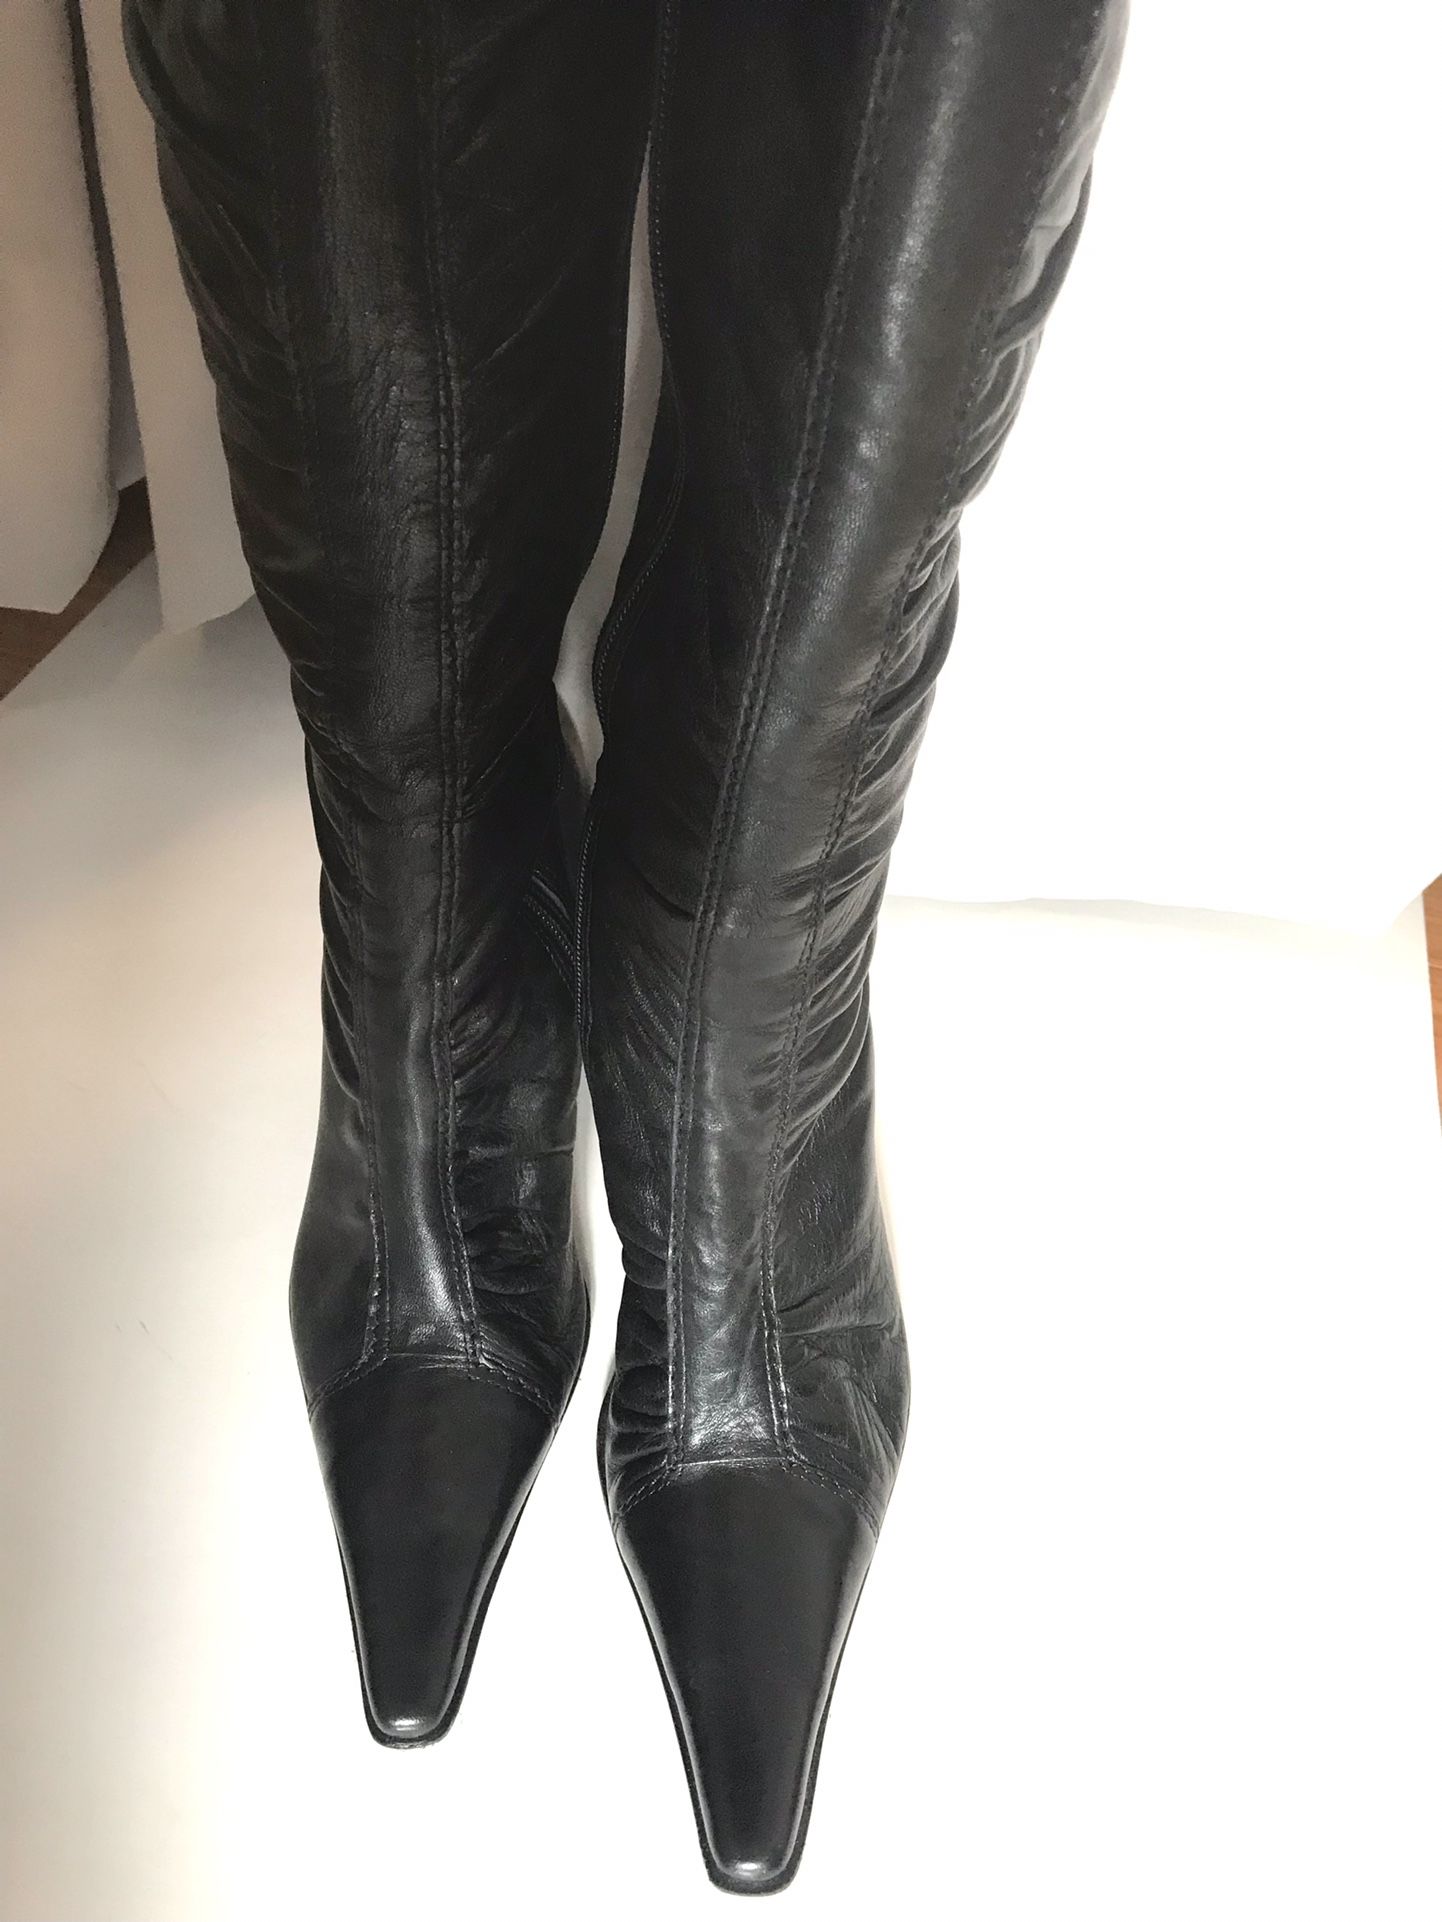 Woman’s Black Boots 